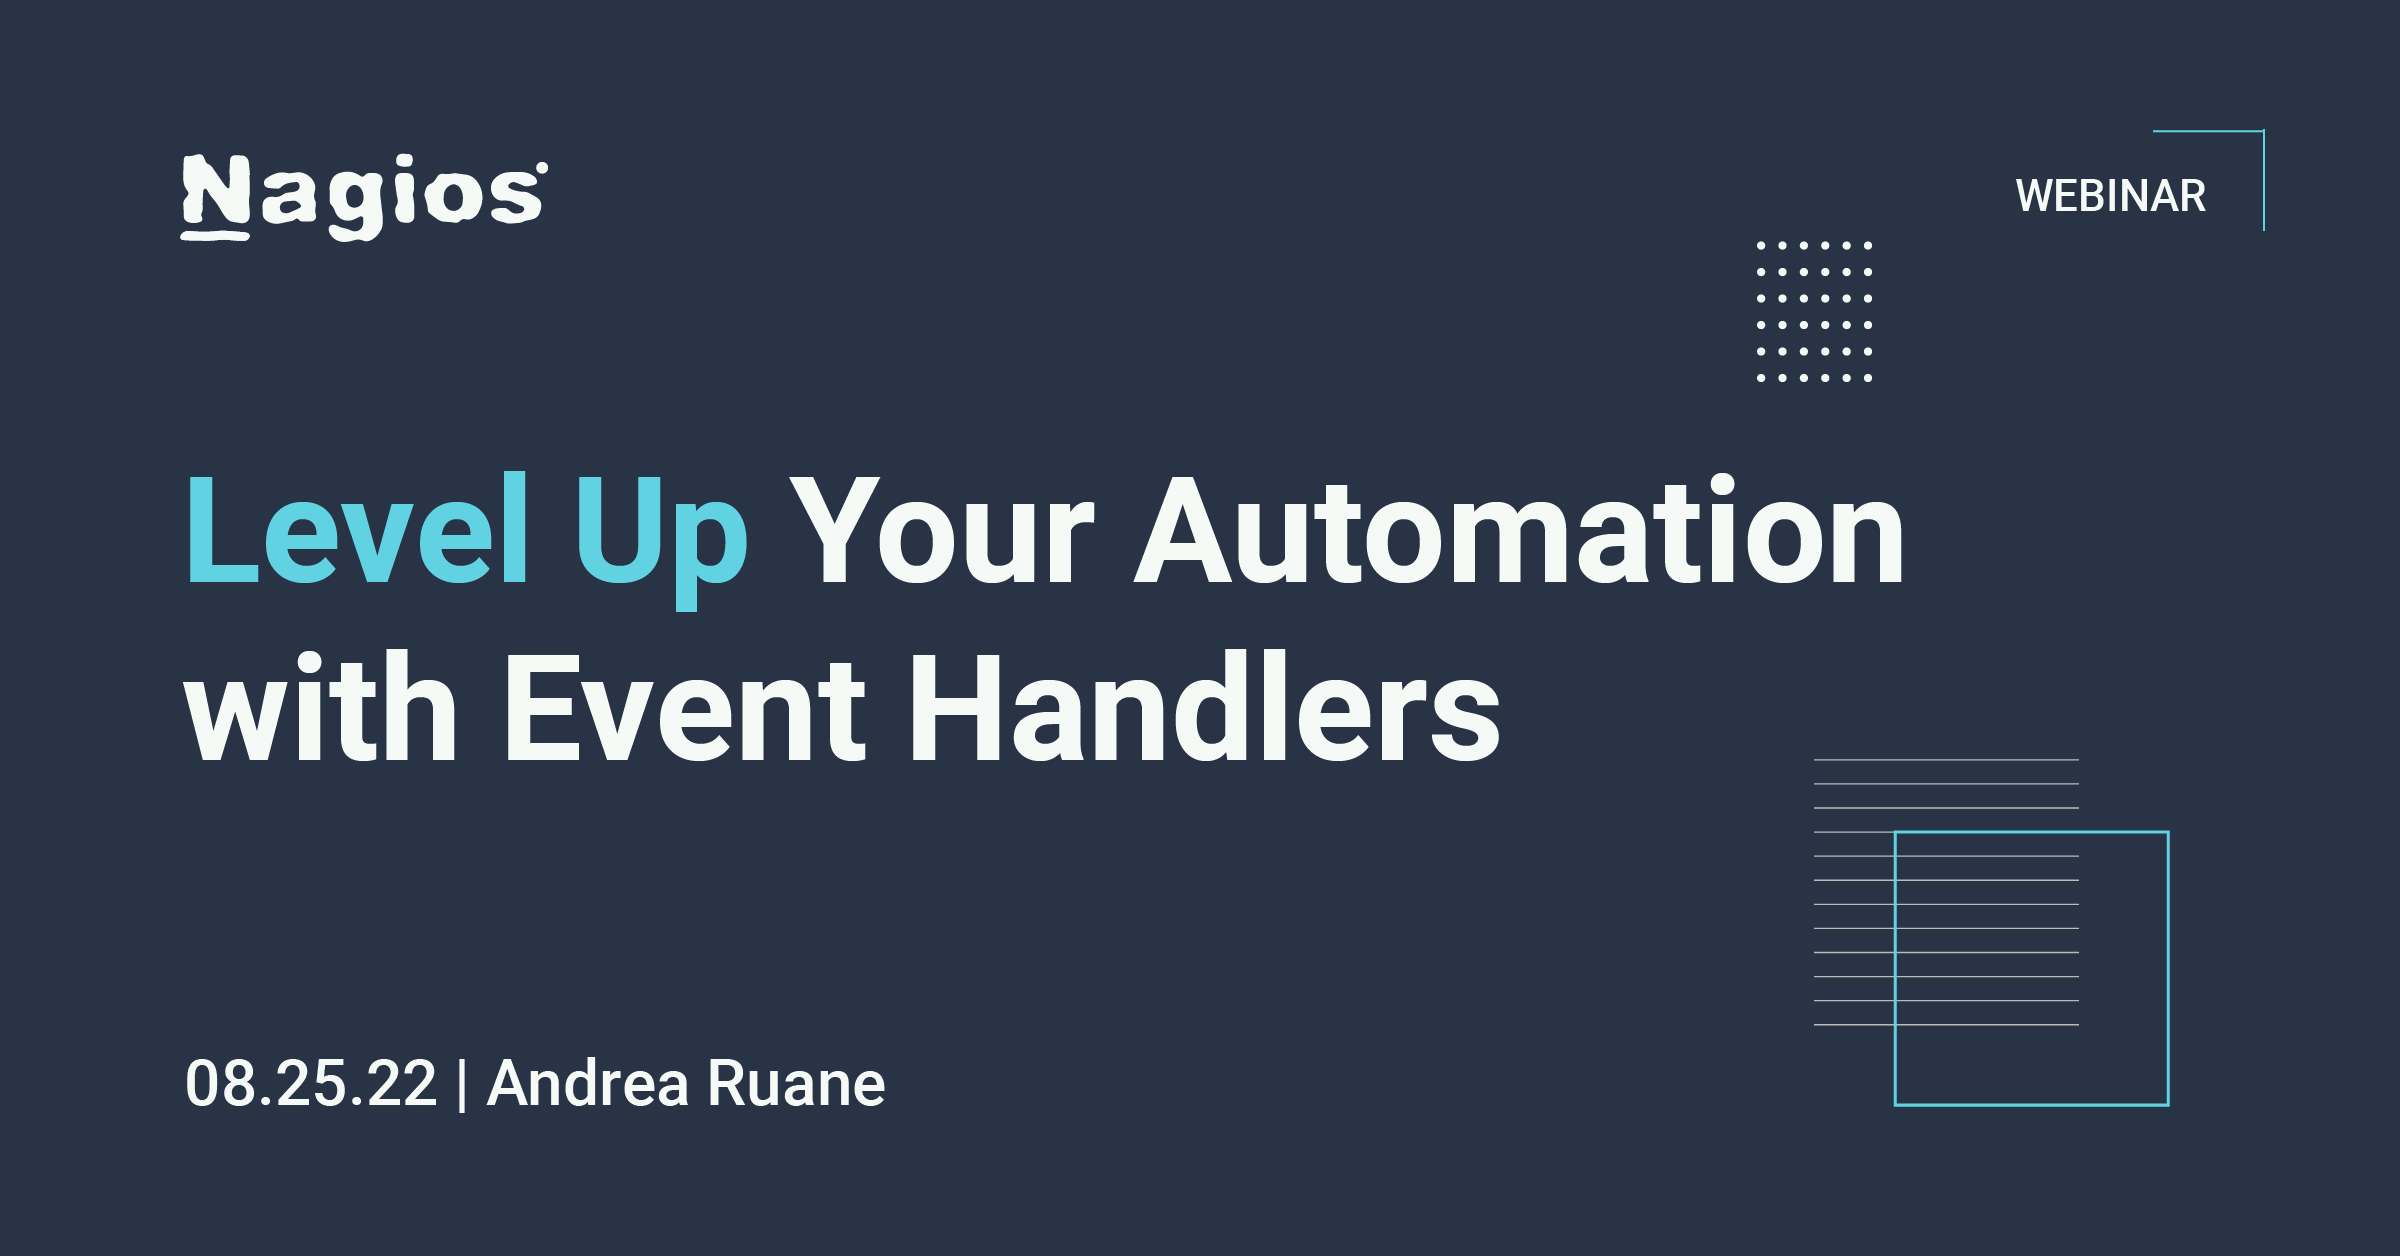 nagios webinar: level up your automation with event handlers